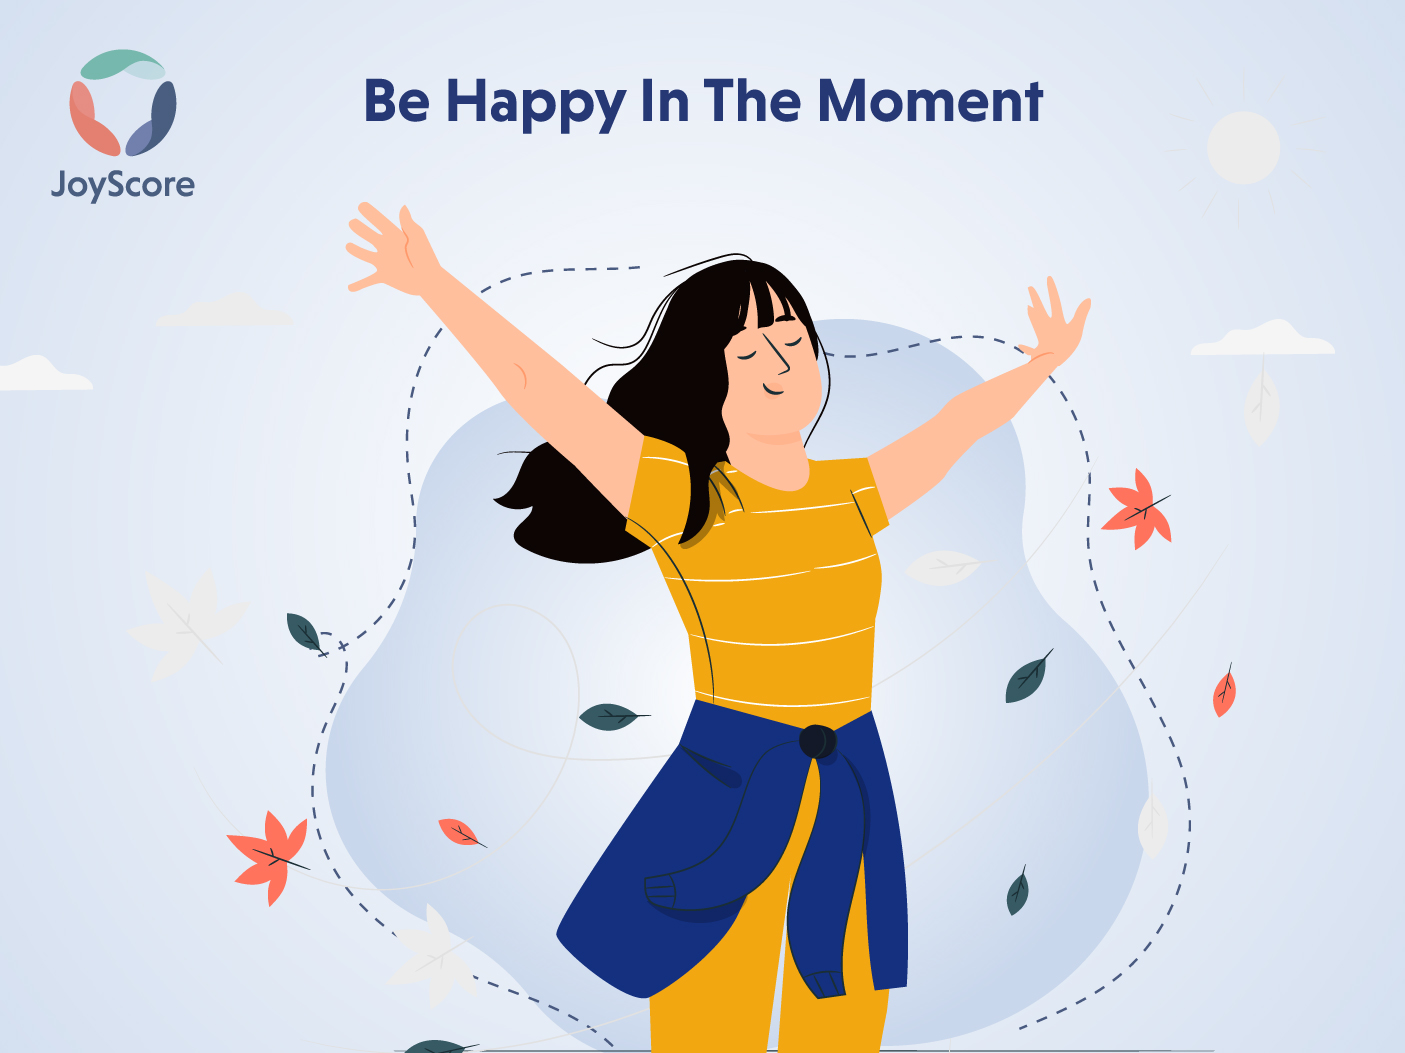 7 Amazing Reasons To Be Happy At The Moment